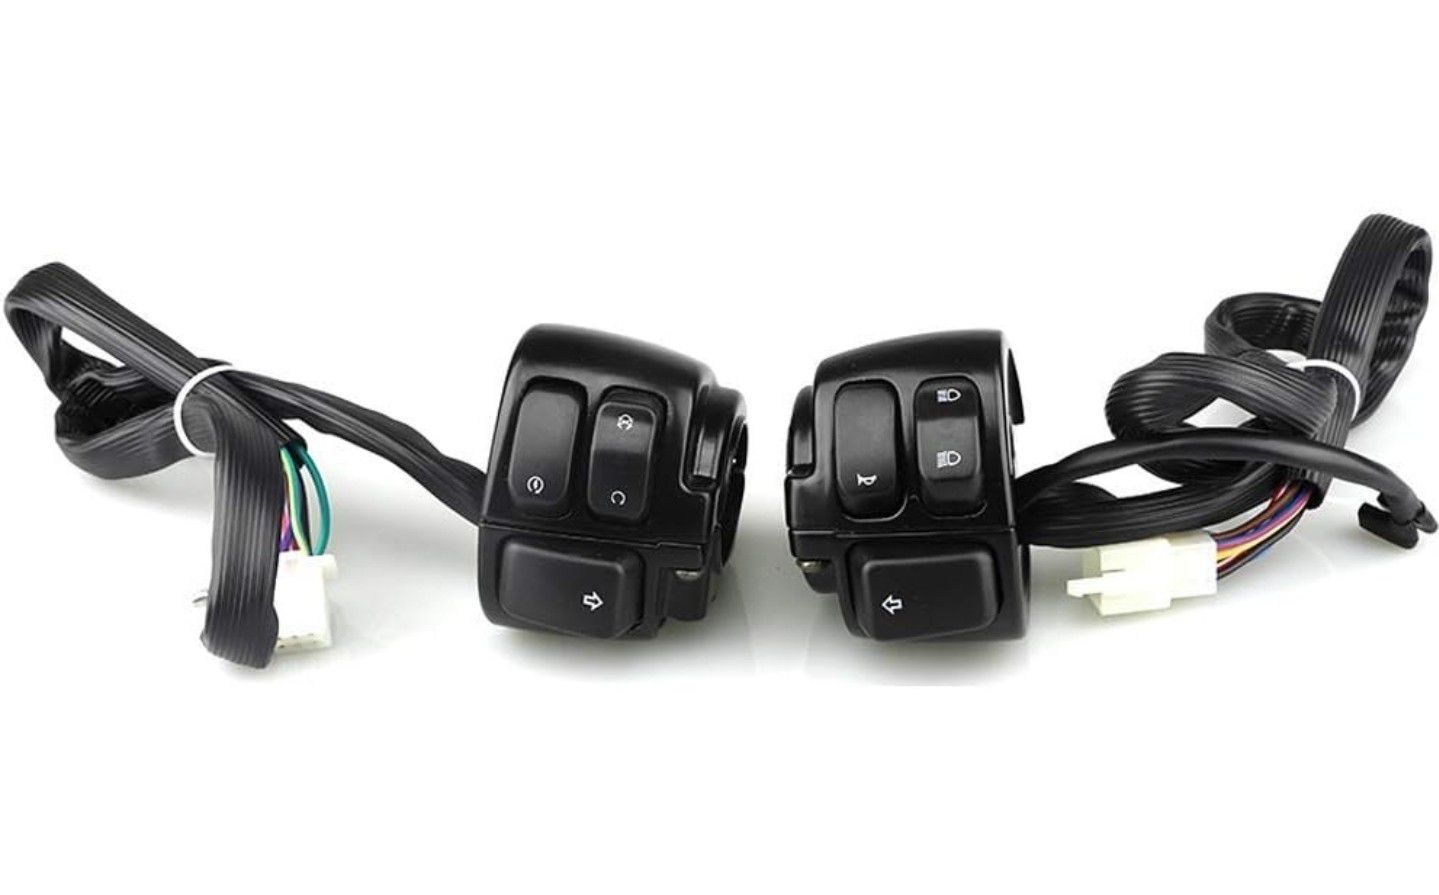 Hand Control Switch Fit For Motorbike